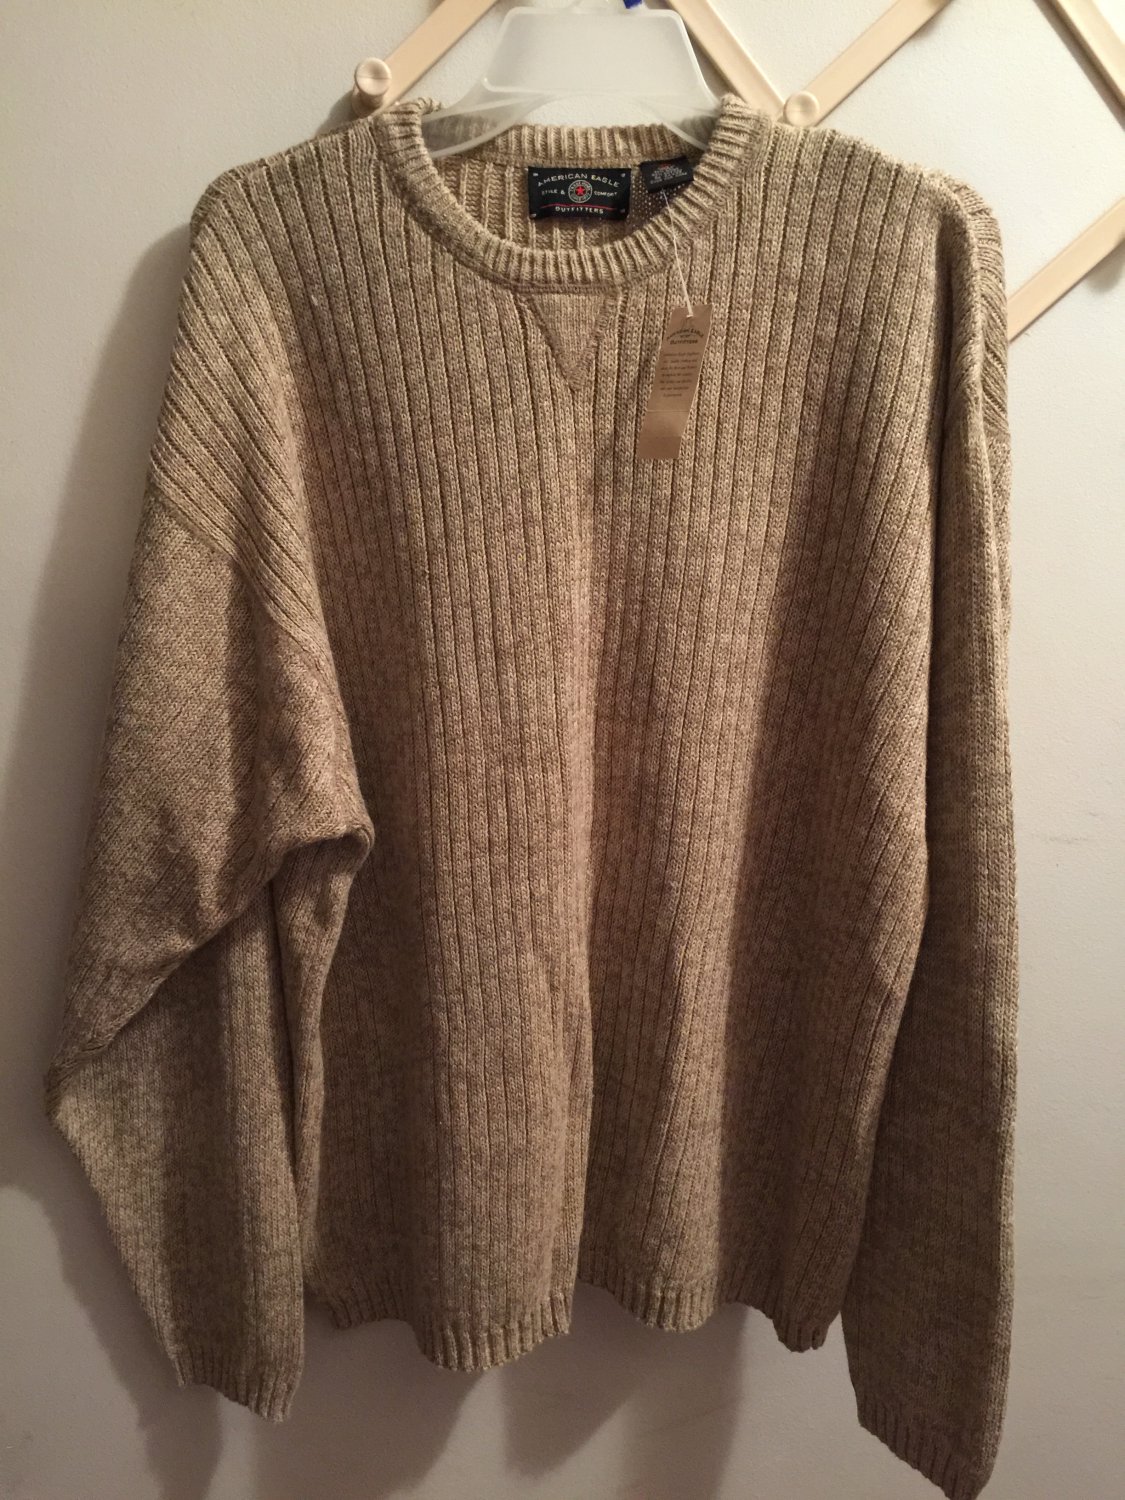 Men's American Eagle Outfitters Long Sleeve Pullover Sweater NWT